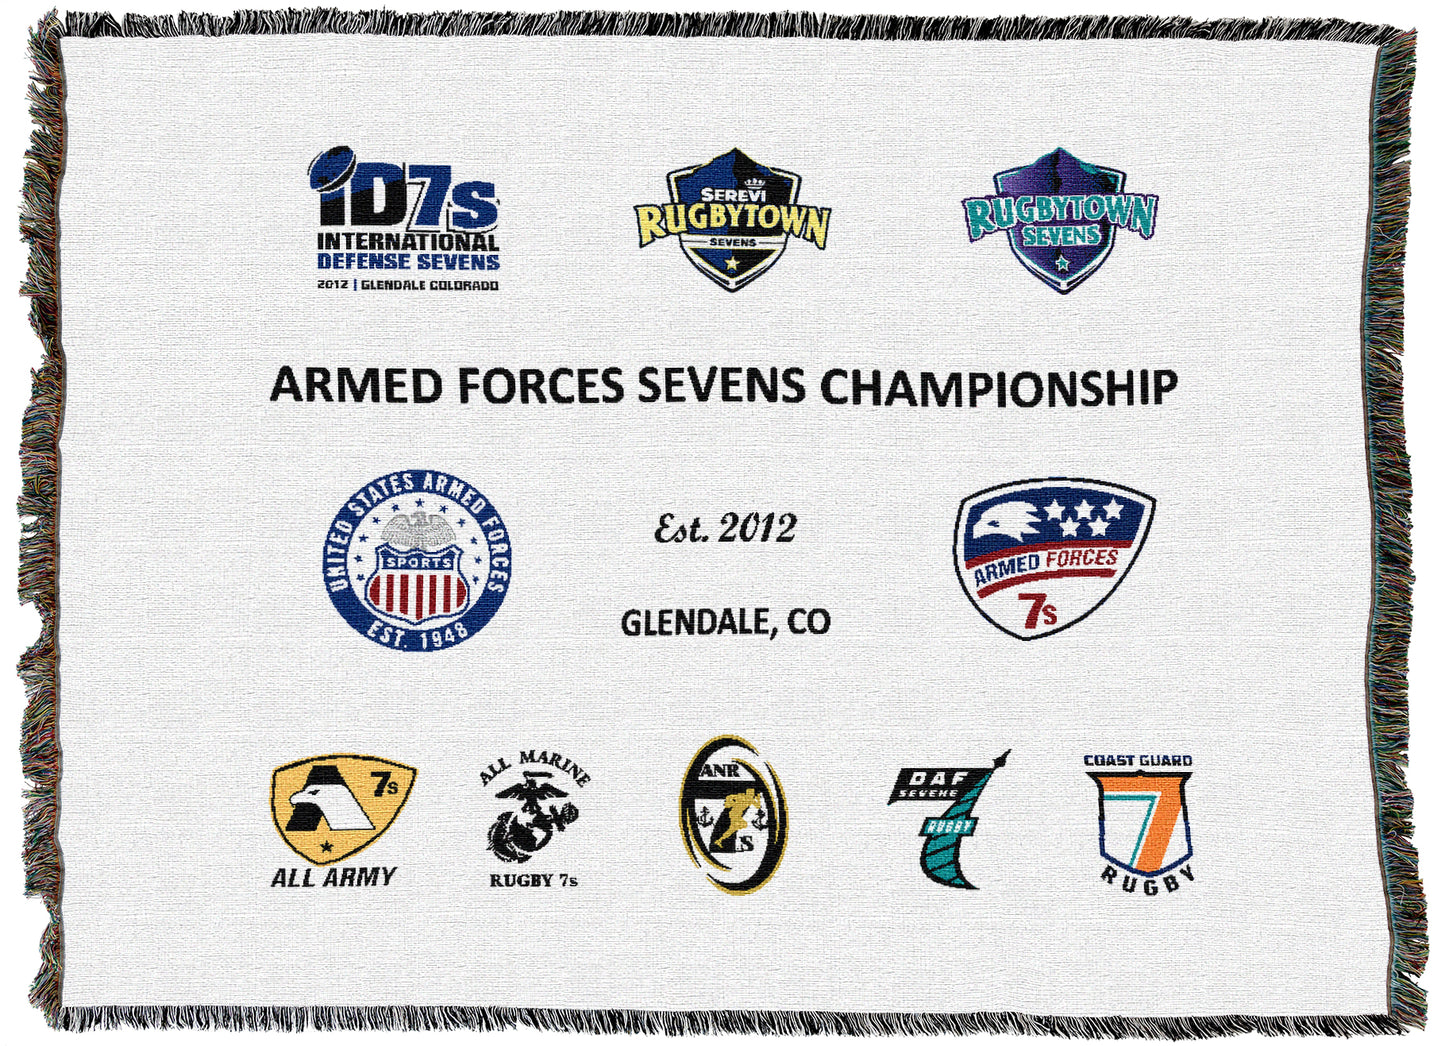 ARMED FORCES RUGBY 7s BLANKET